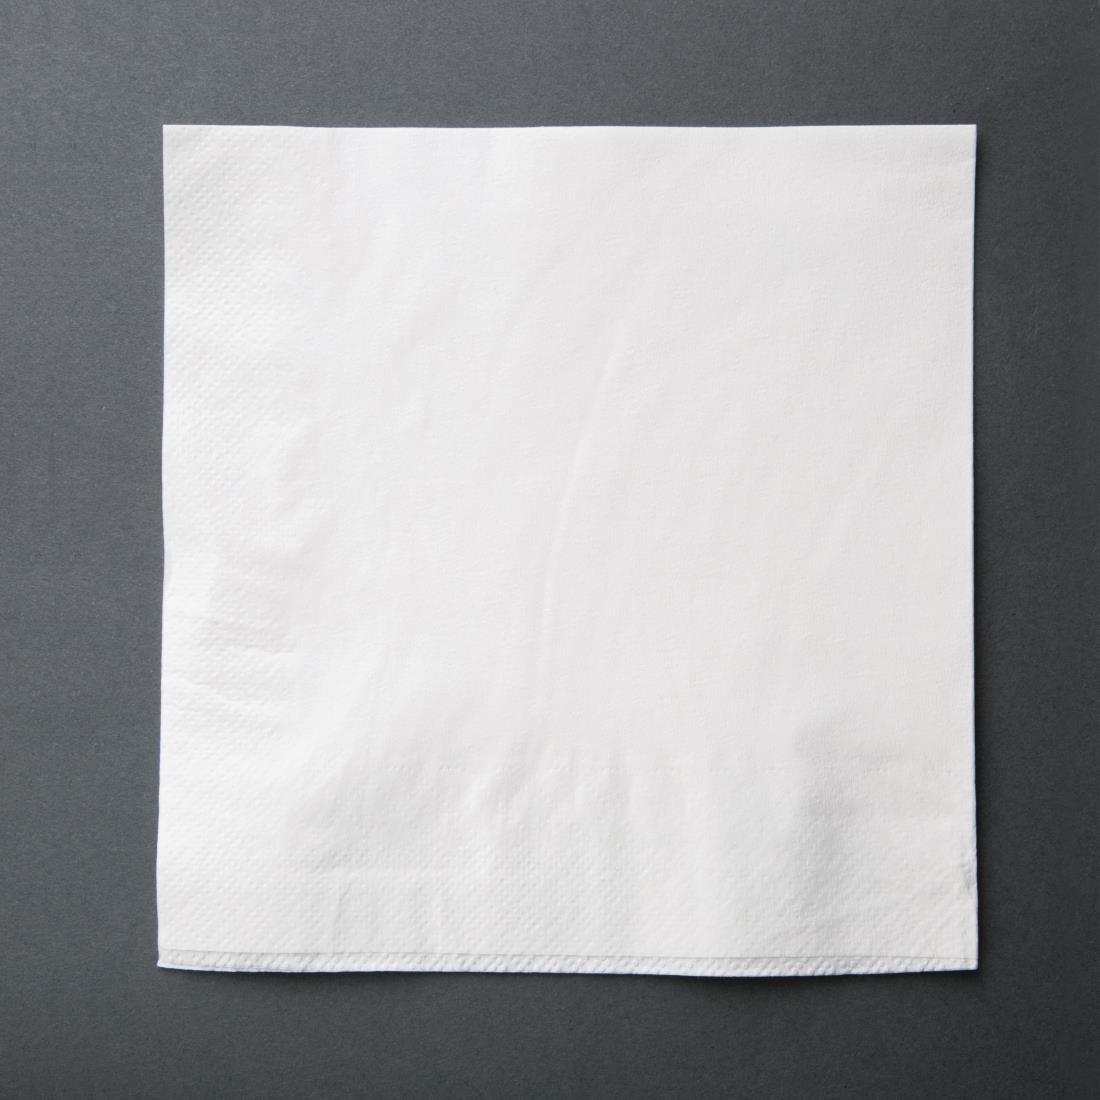 Fiesta Recyclable Lunch Napkin White 30x30cm 2ply 1/4 Fold (Pack of 2000) - CM562  - 1